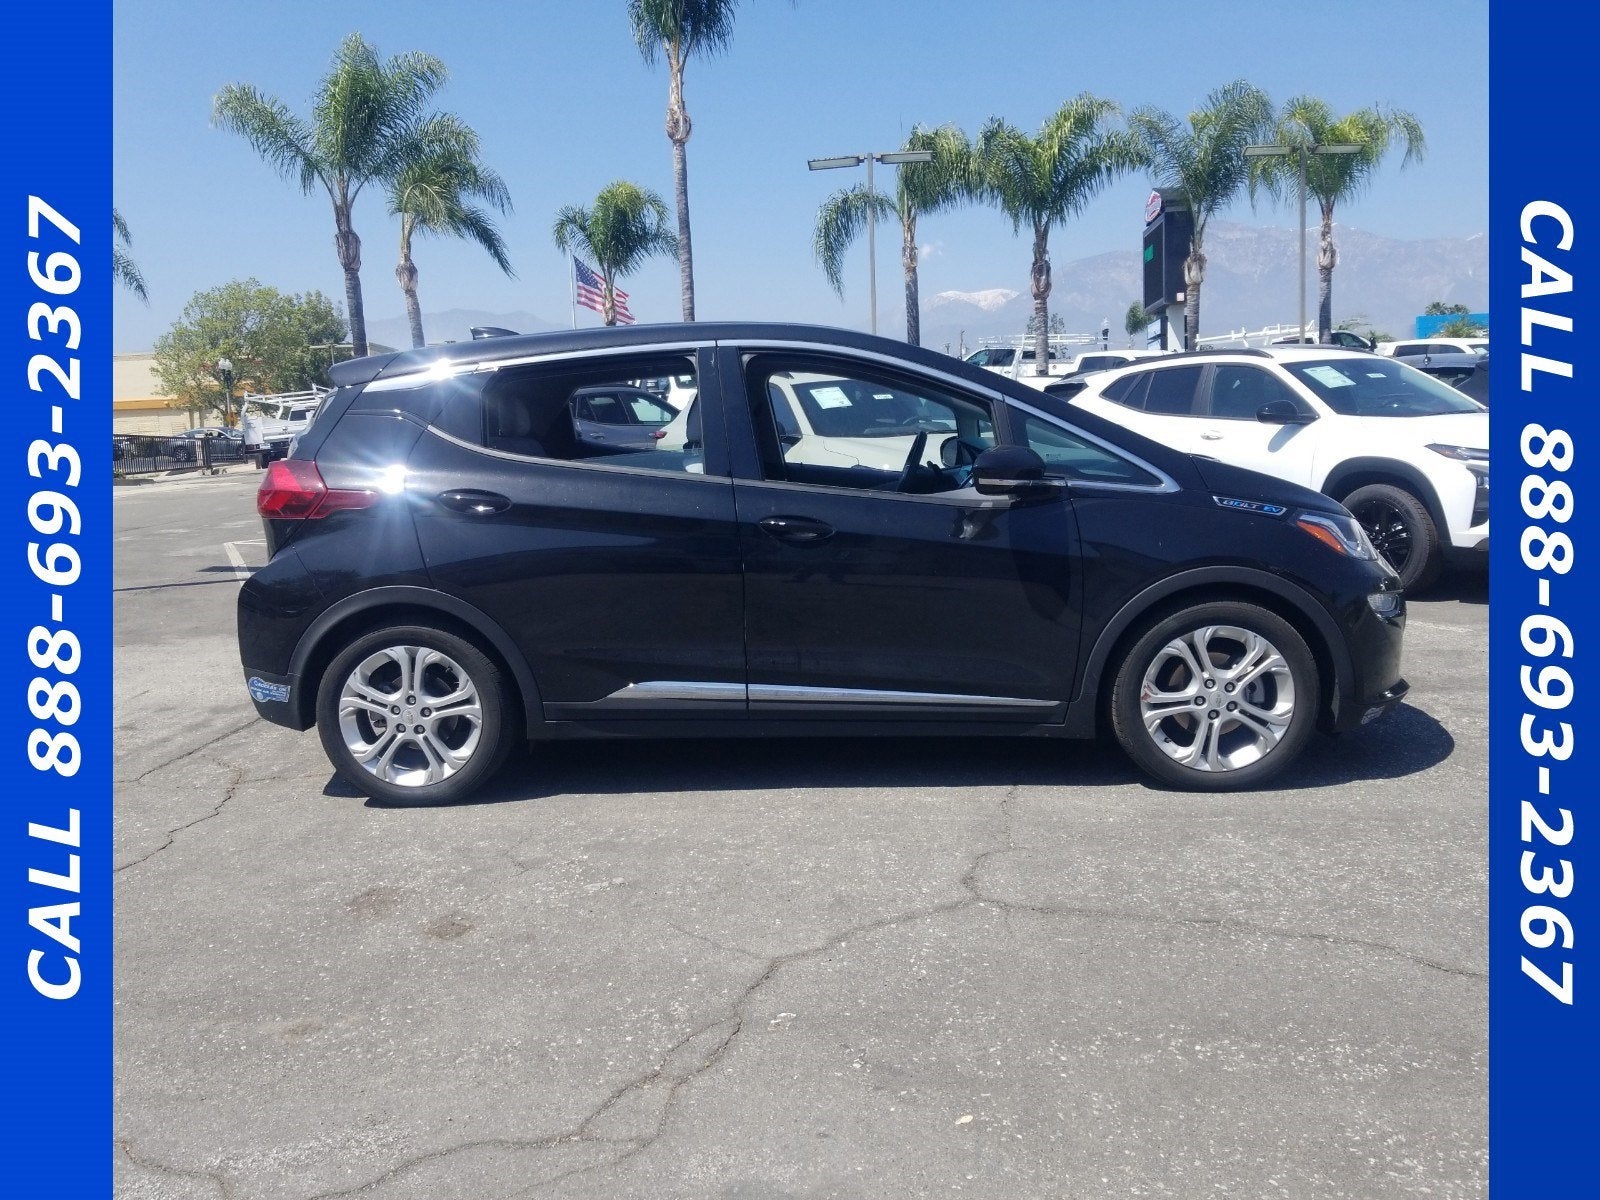 Used 2021 Chevrolet Bolt EV LT with VIN 1G1FY6S09M4104092 for sale in Upland, CA